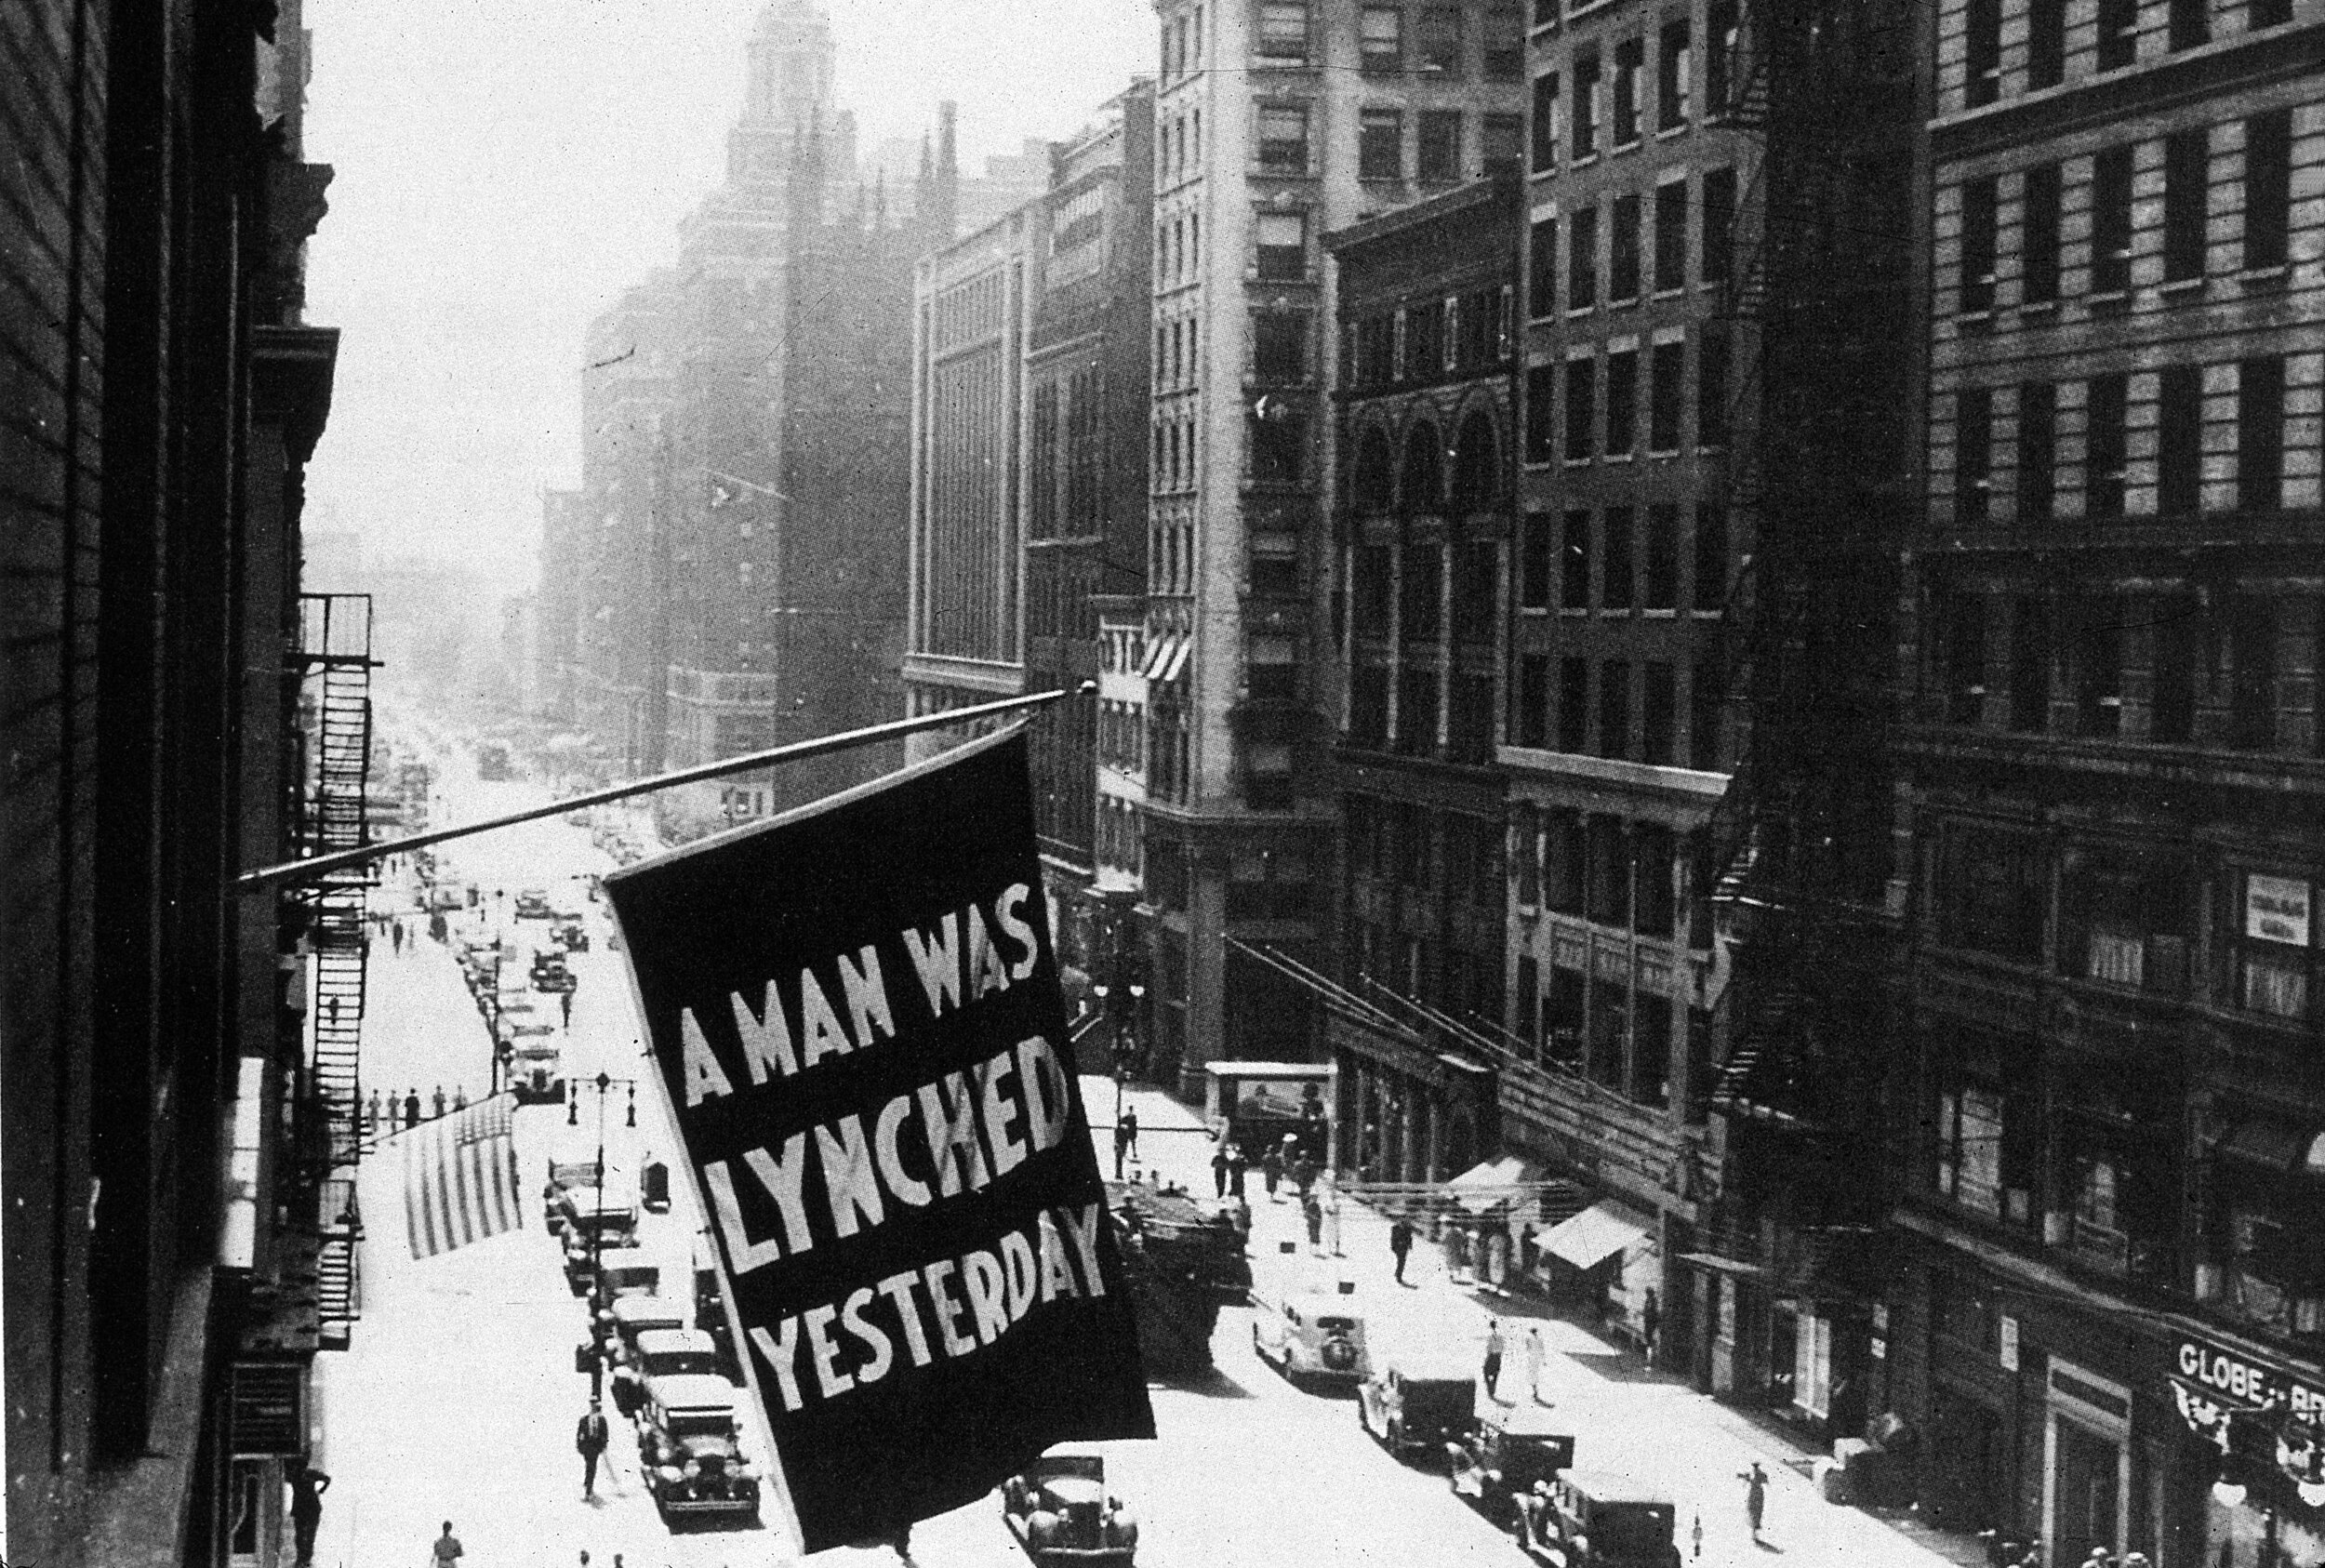 The National Association for the Advancement of Colored People would fly a flag from its window of in Fifth Avenue each time a lynching took place. Unknown photographer, NYC 1936.